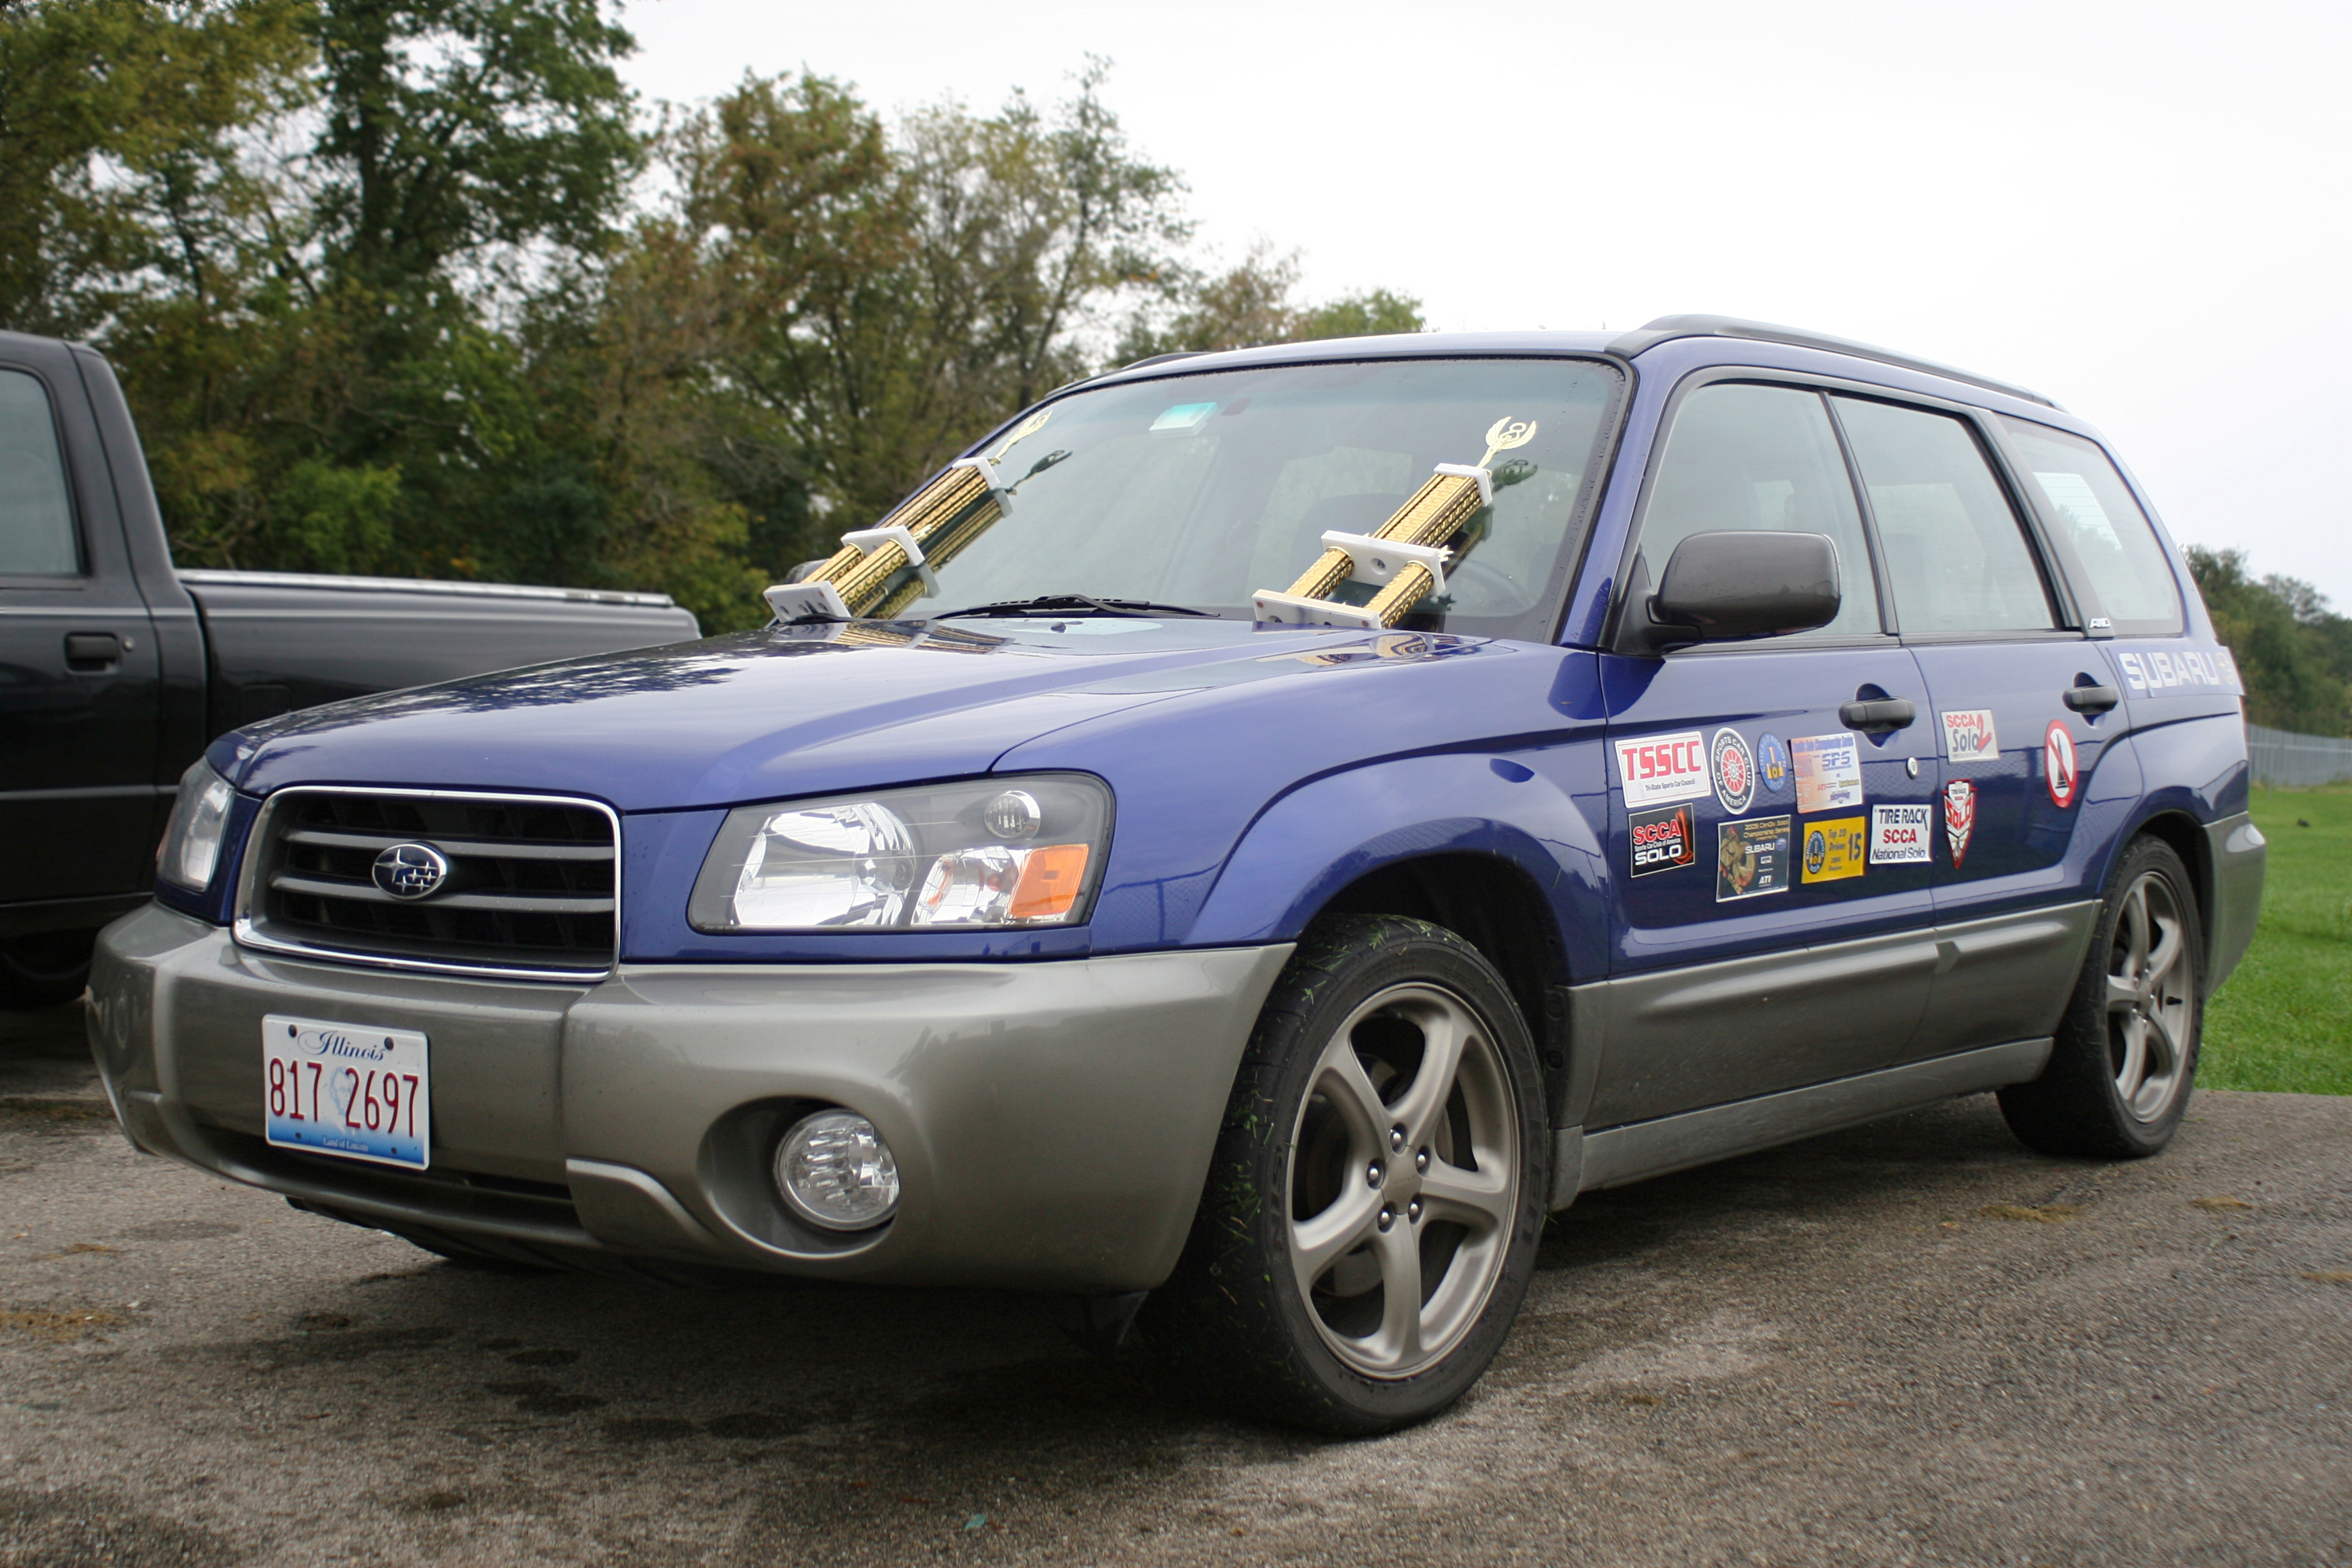 Autocross (ricer) car with trophies